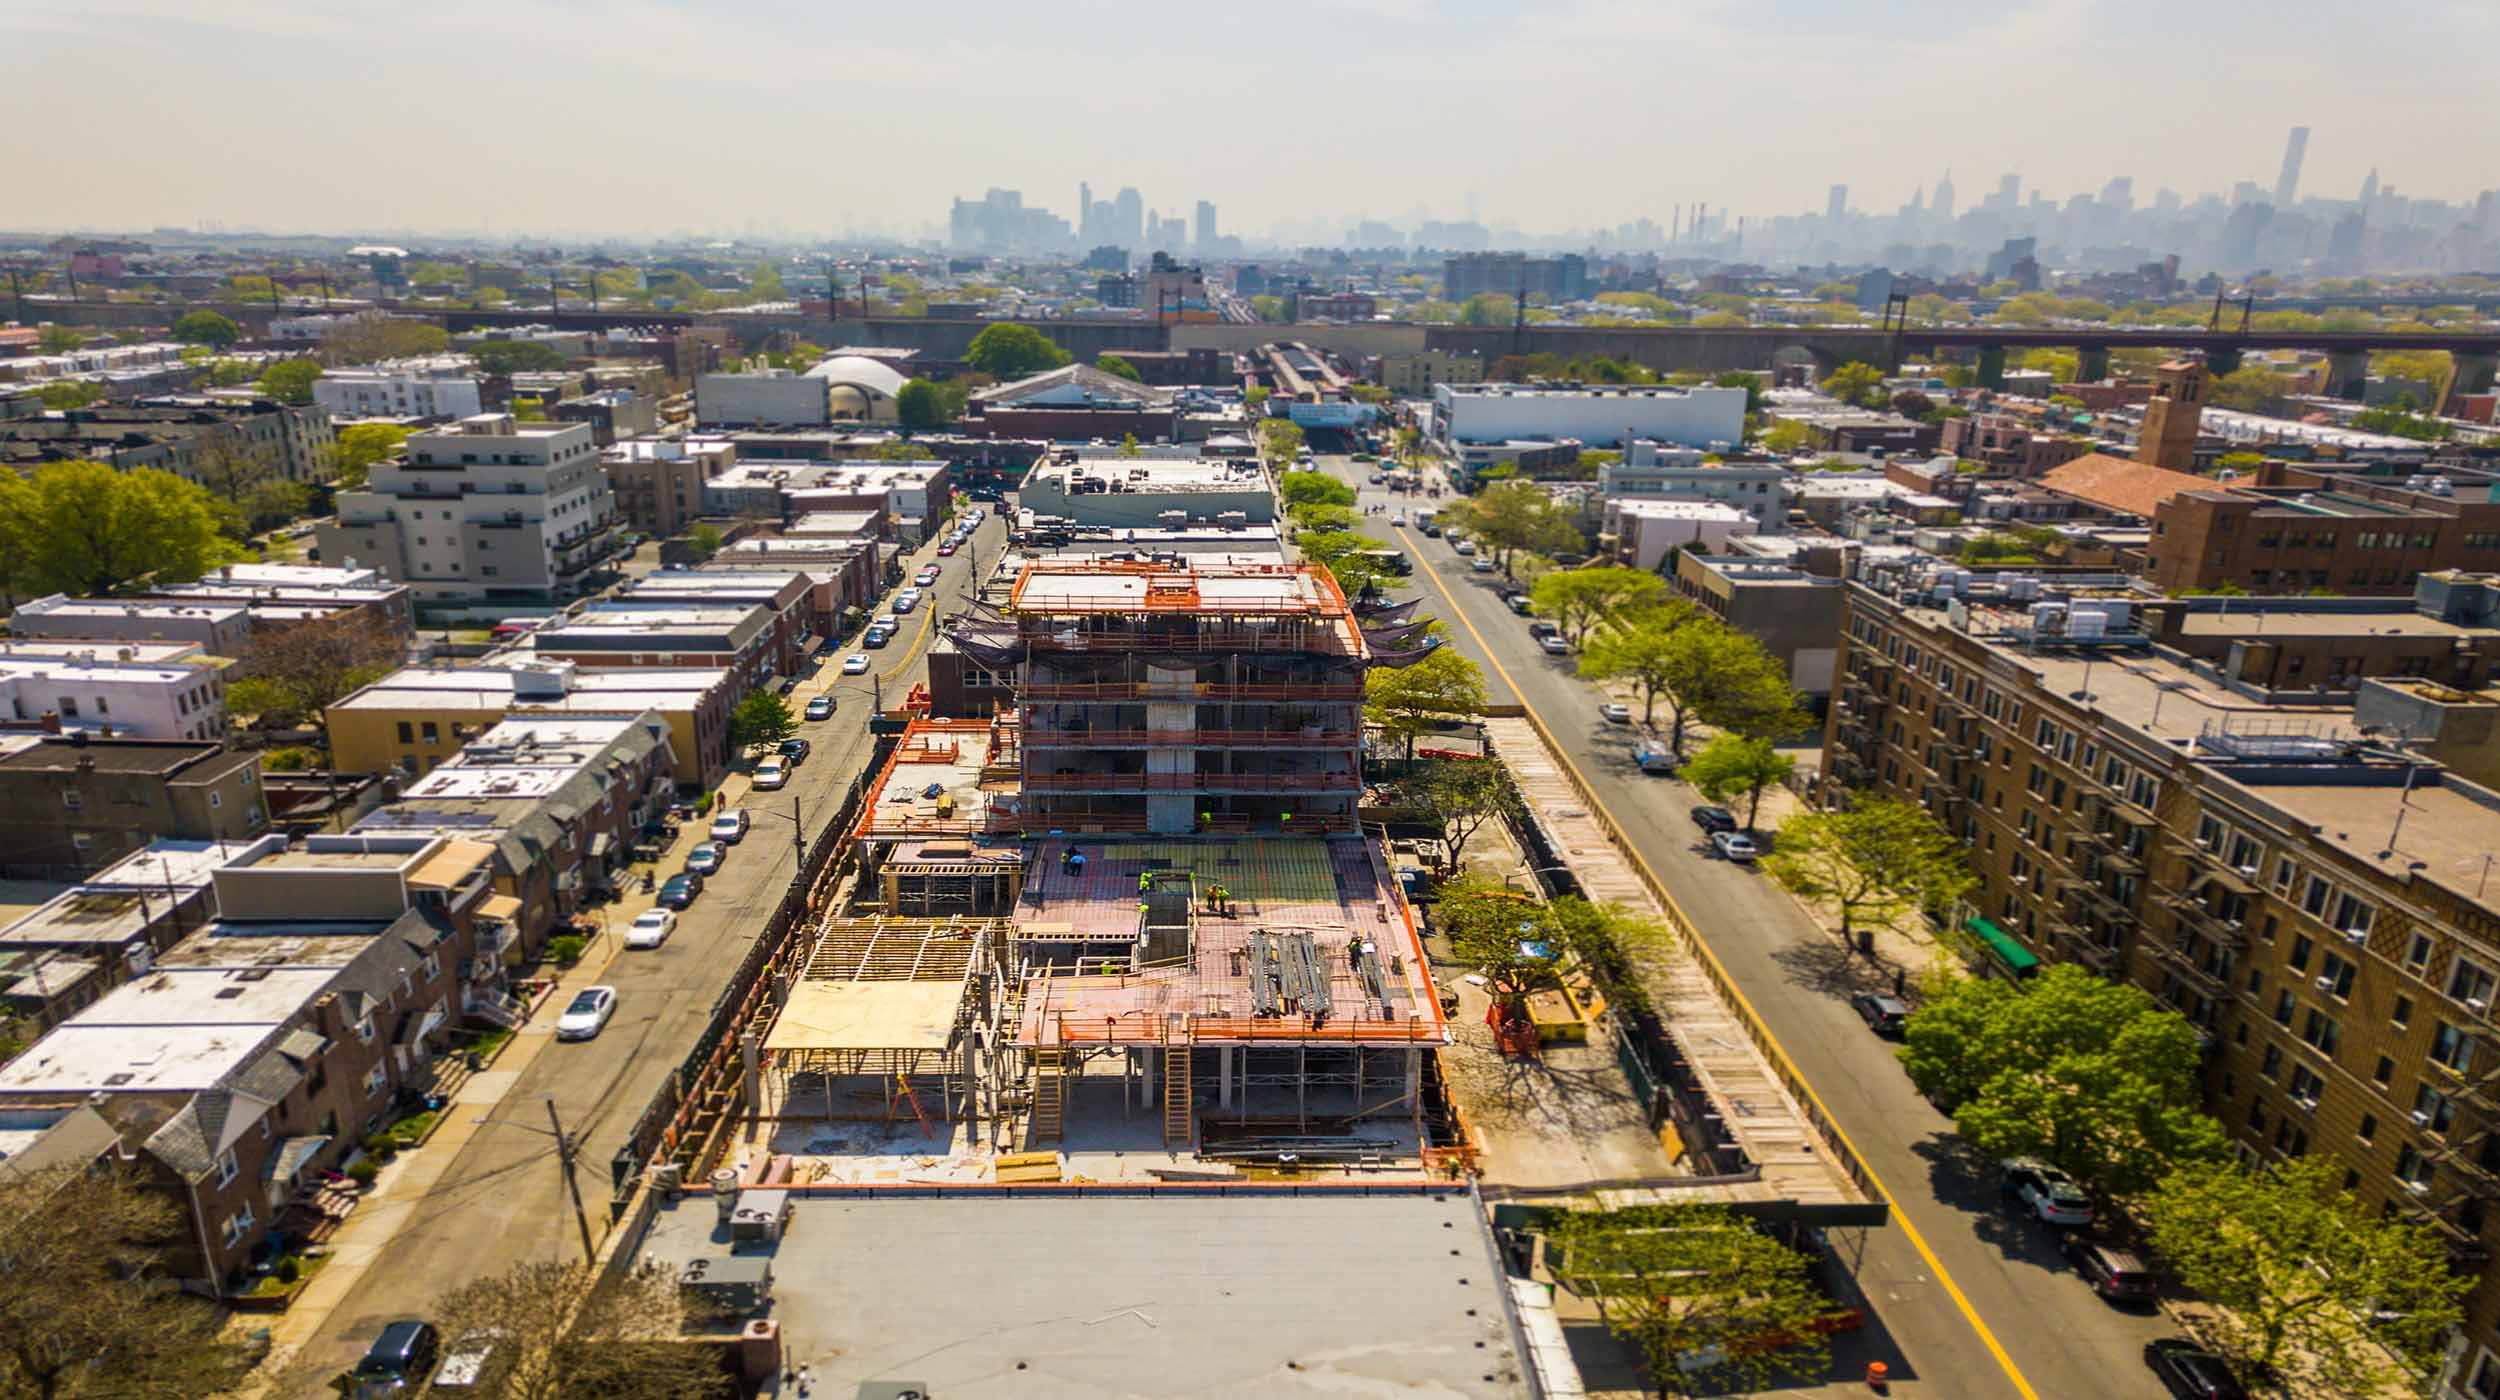 The Rowan, a new luxury condominium project at 21-21 31st Street in Astoria, Queens, New York, has 99,458 SF, including retail, common space and 46 residential units.